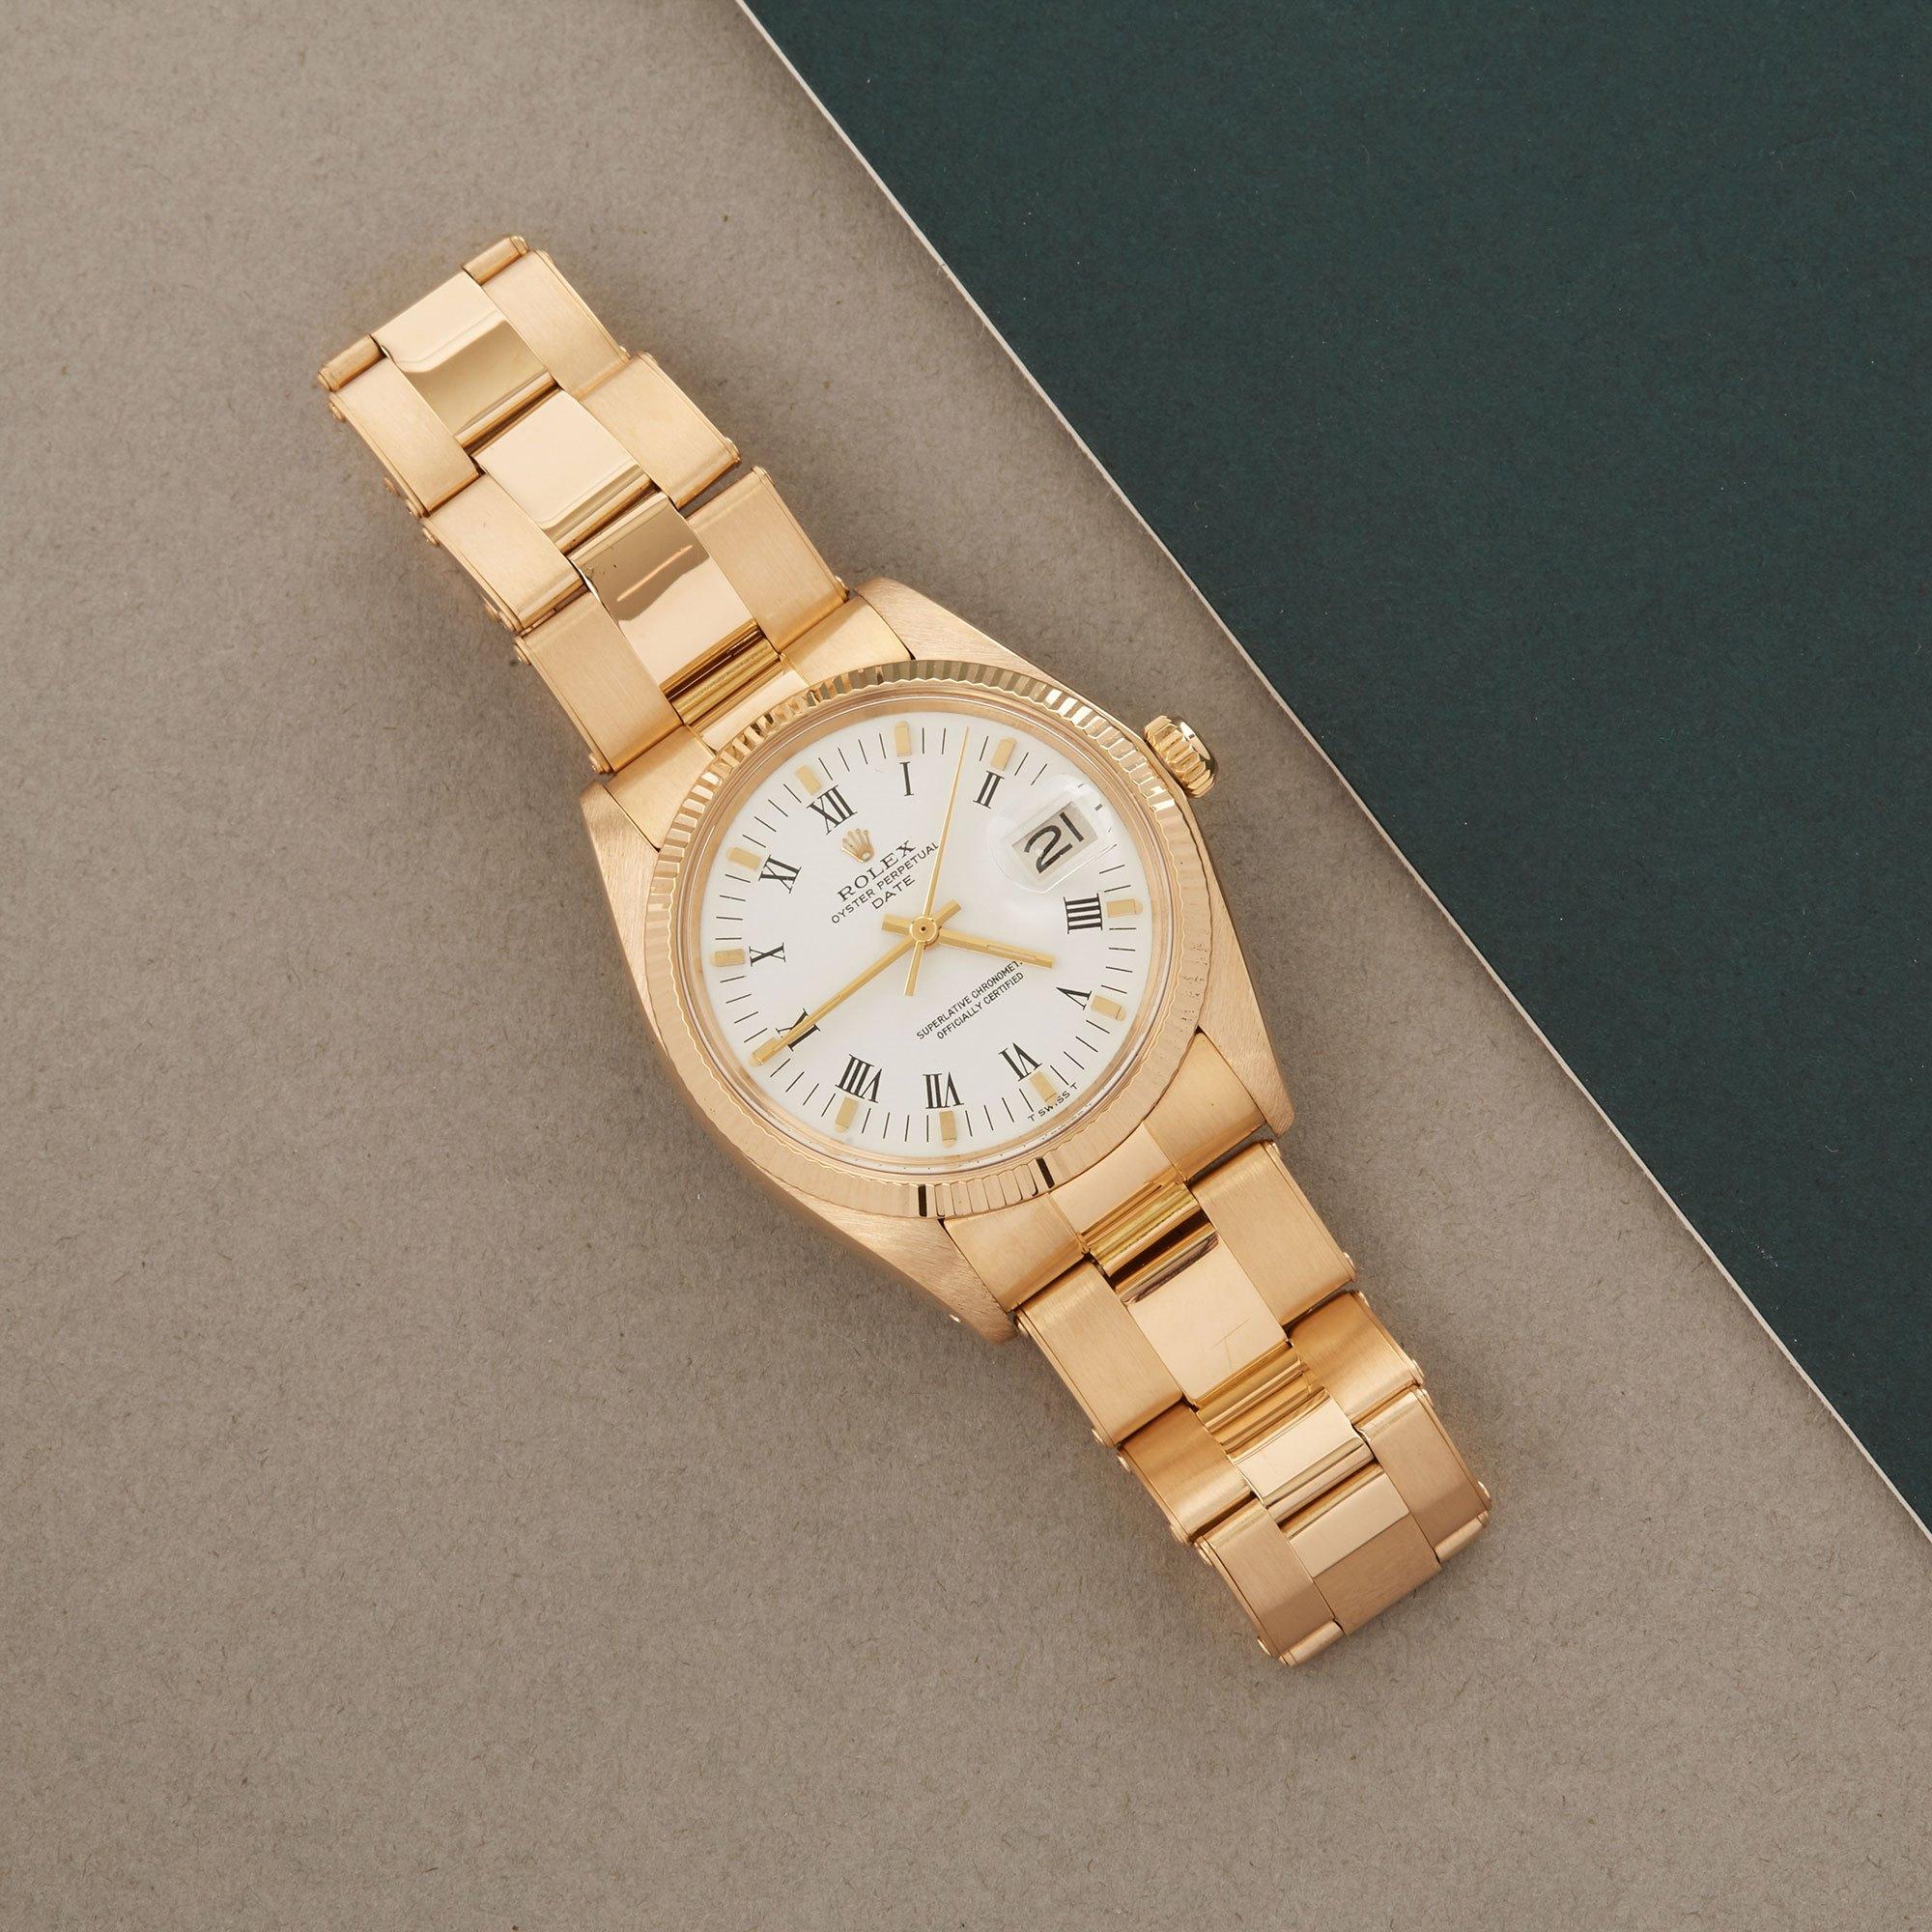 Xupes Reference: W007538
Manufacturer: Rolex
Model: Oyster Perpetual
Model Variant: Date
Model Number: 1503
Age: 1980
Gender: Unisex
Complete With: Rolex Box
Dial: White Roman
Glass: Sapphire Crystal
Case Size: 34mm
Case Material: Yellow Gold
Strap